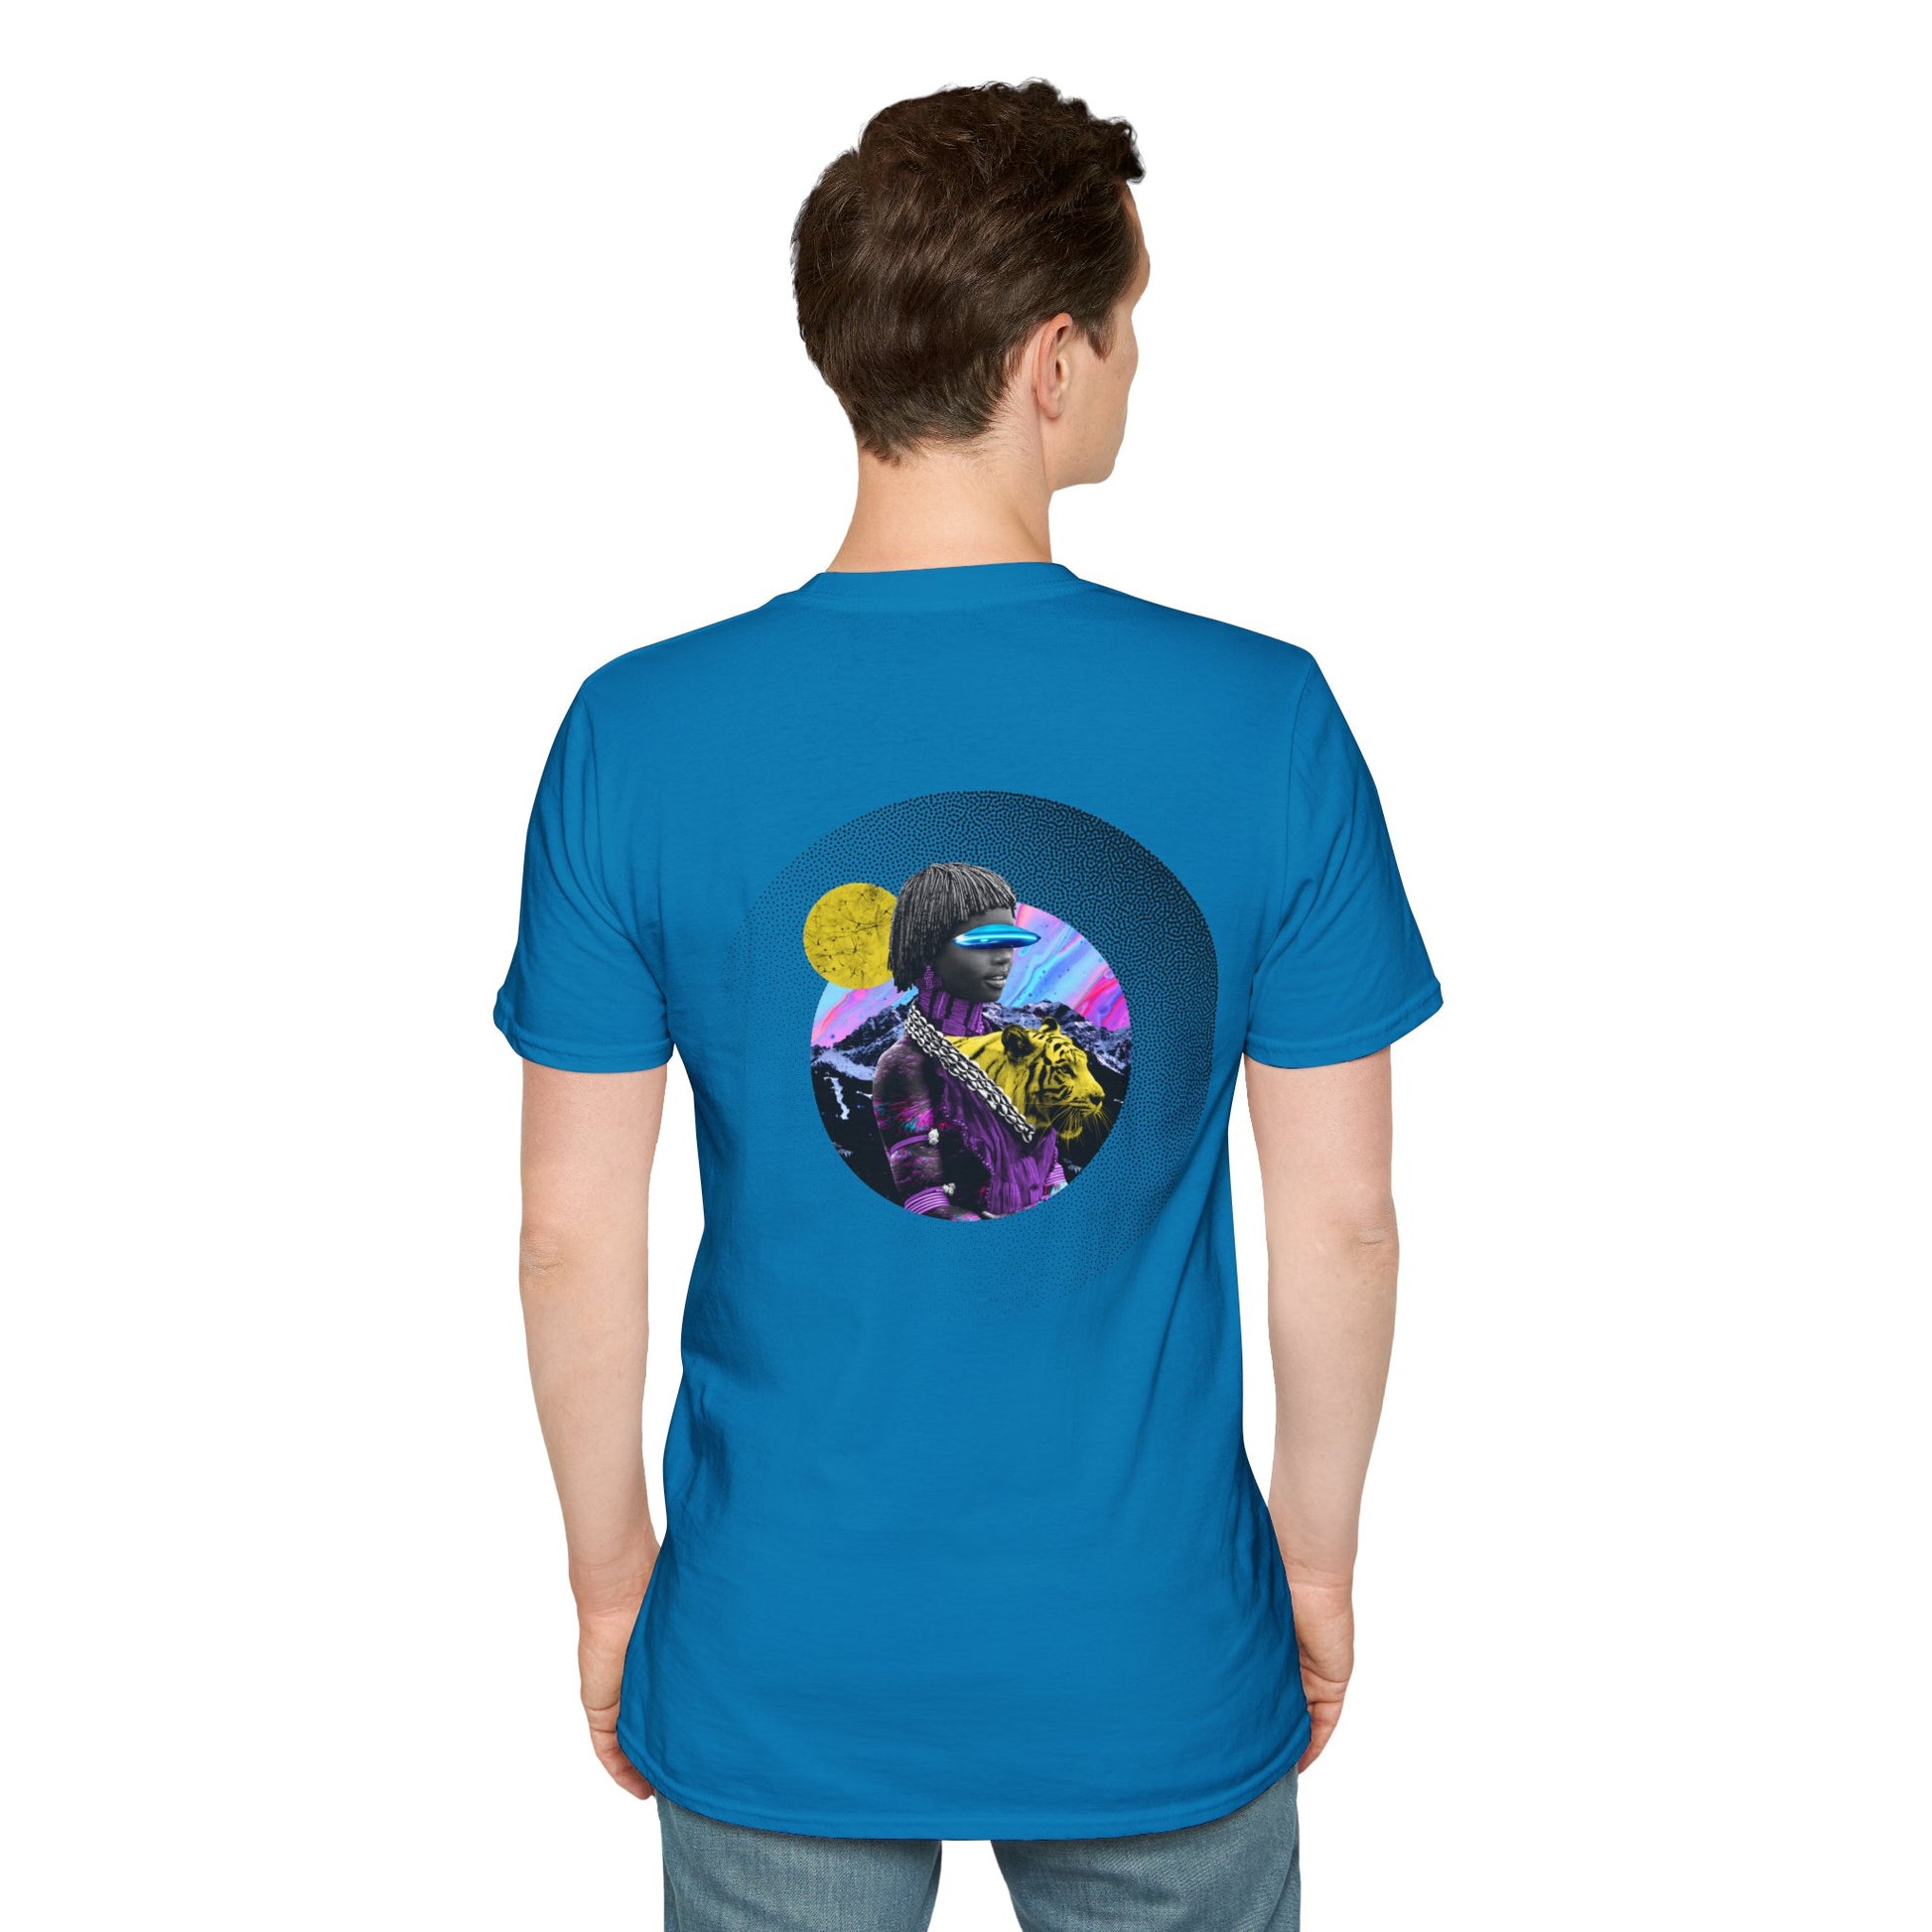 Sky Blue T-shirt with a collage of an African woman with futuristic glasses and a yellow tiger